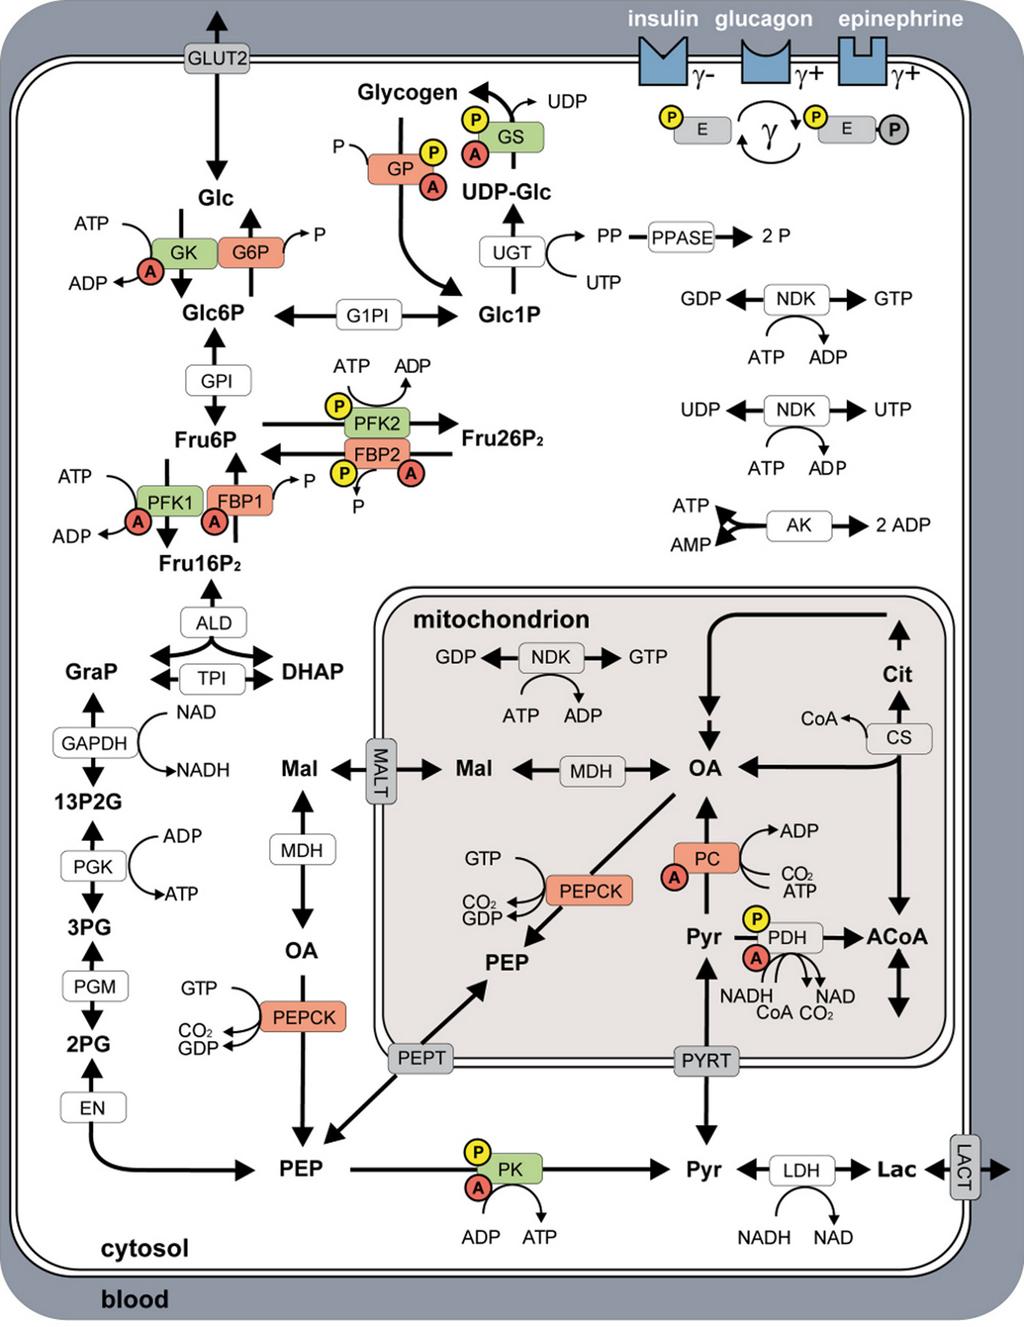 FIGURE 1. Model of human hepatocyte glucose metabolism comprising glycolysis, gluconeogenesis, and the glycogen pathway, and the spatial reaction compartments: blood, cytosol, and mitochondrion.